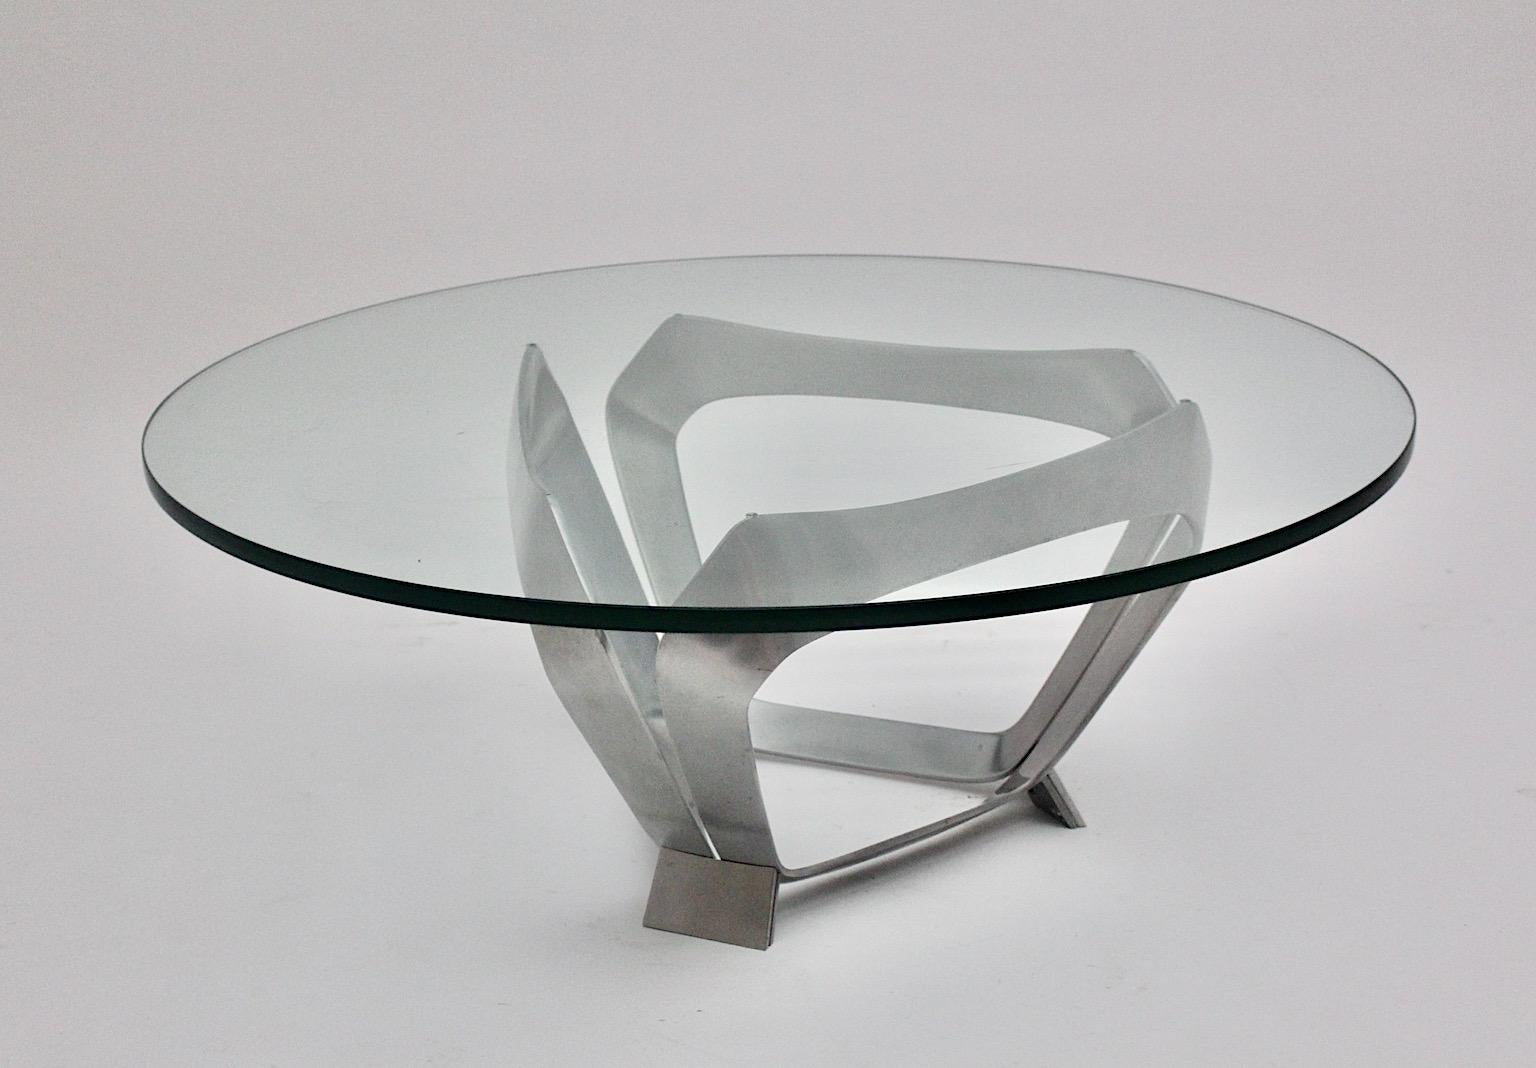 Aluminum glass space age vintage coffee table or sofa table, which was designed by Knut Hesterberg 1960s Germany for Ronald Schmitt.
Beautiful aluminum base construction in sculptural diamond like form, while the clear glass plate shows polished